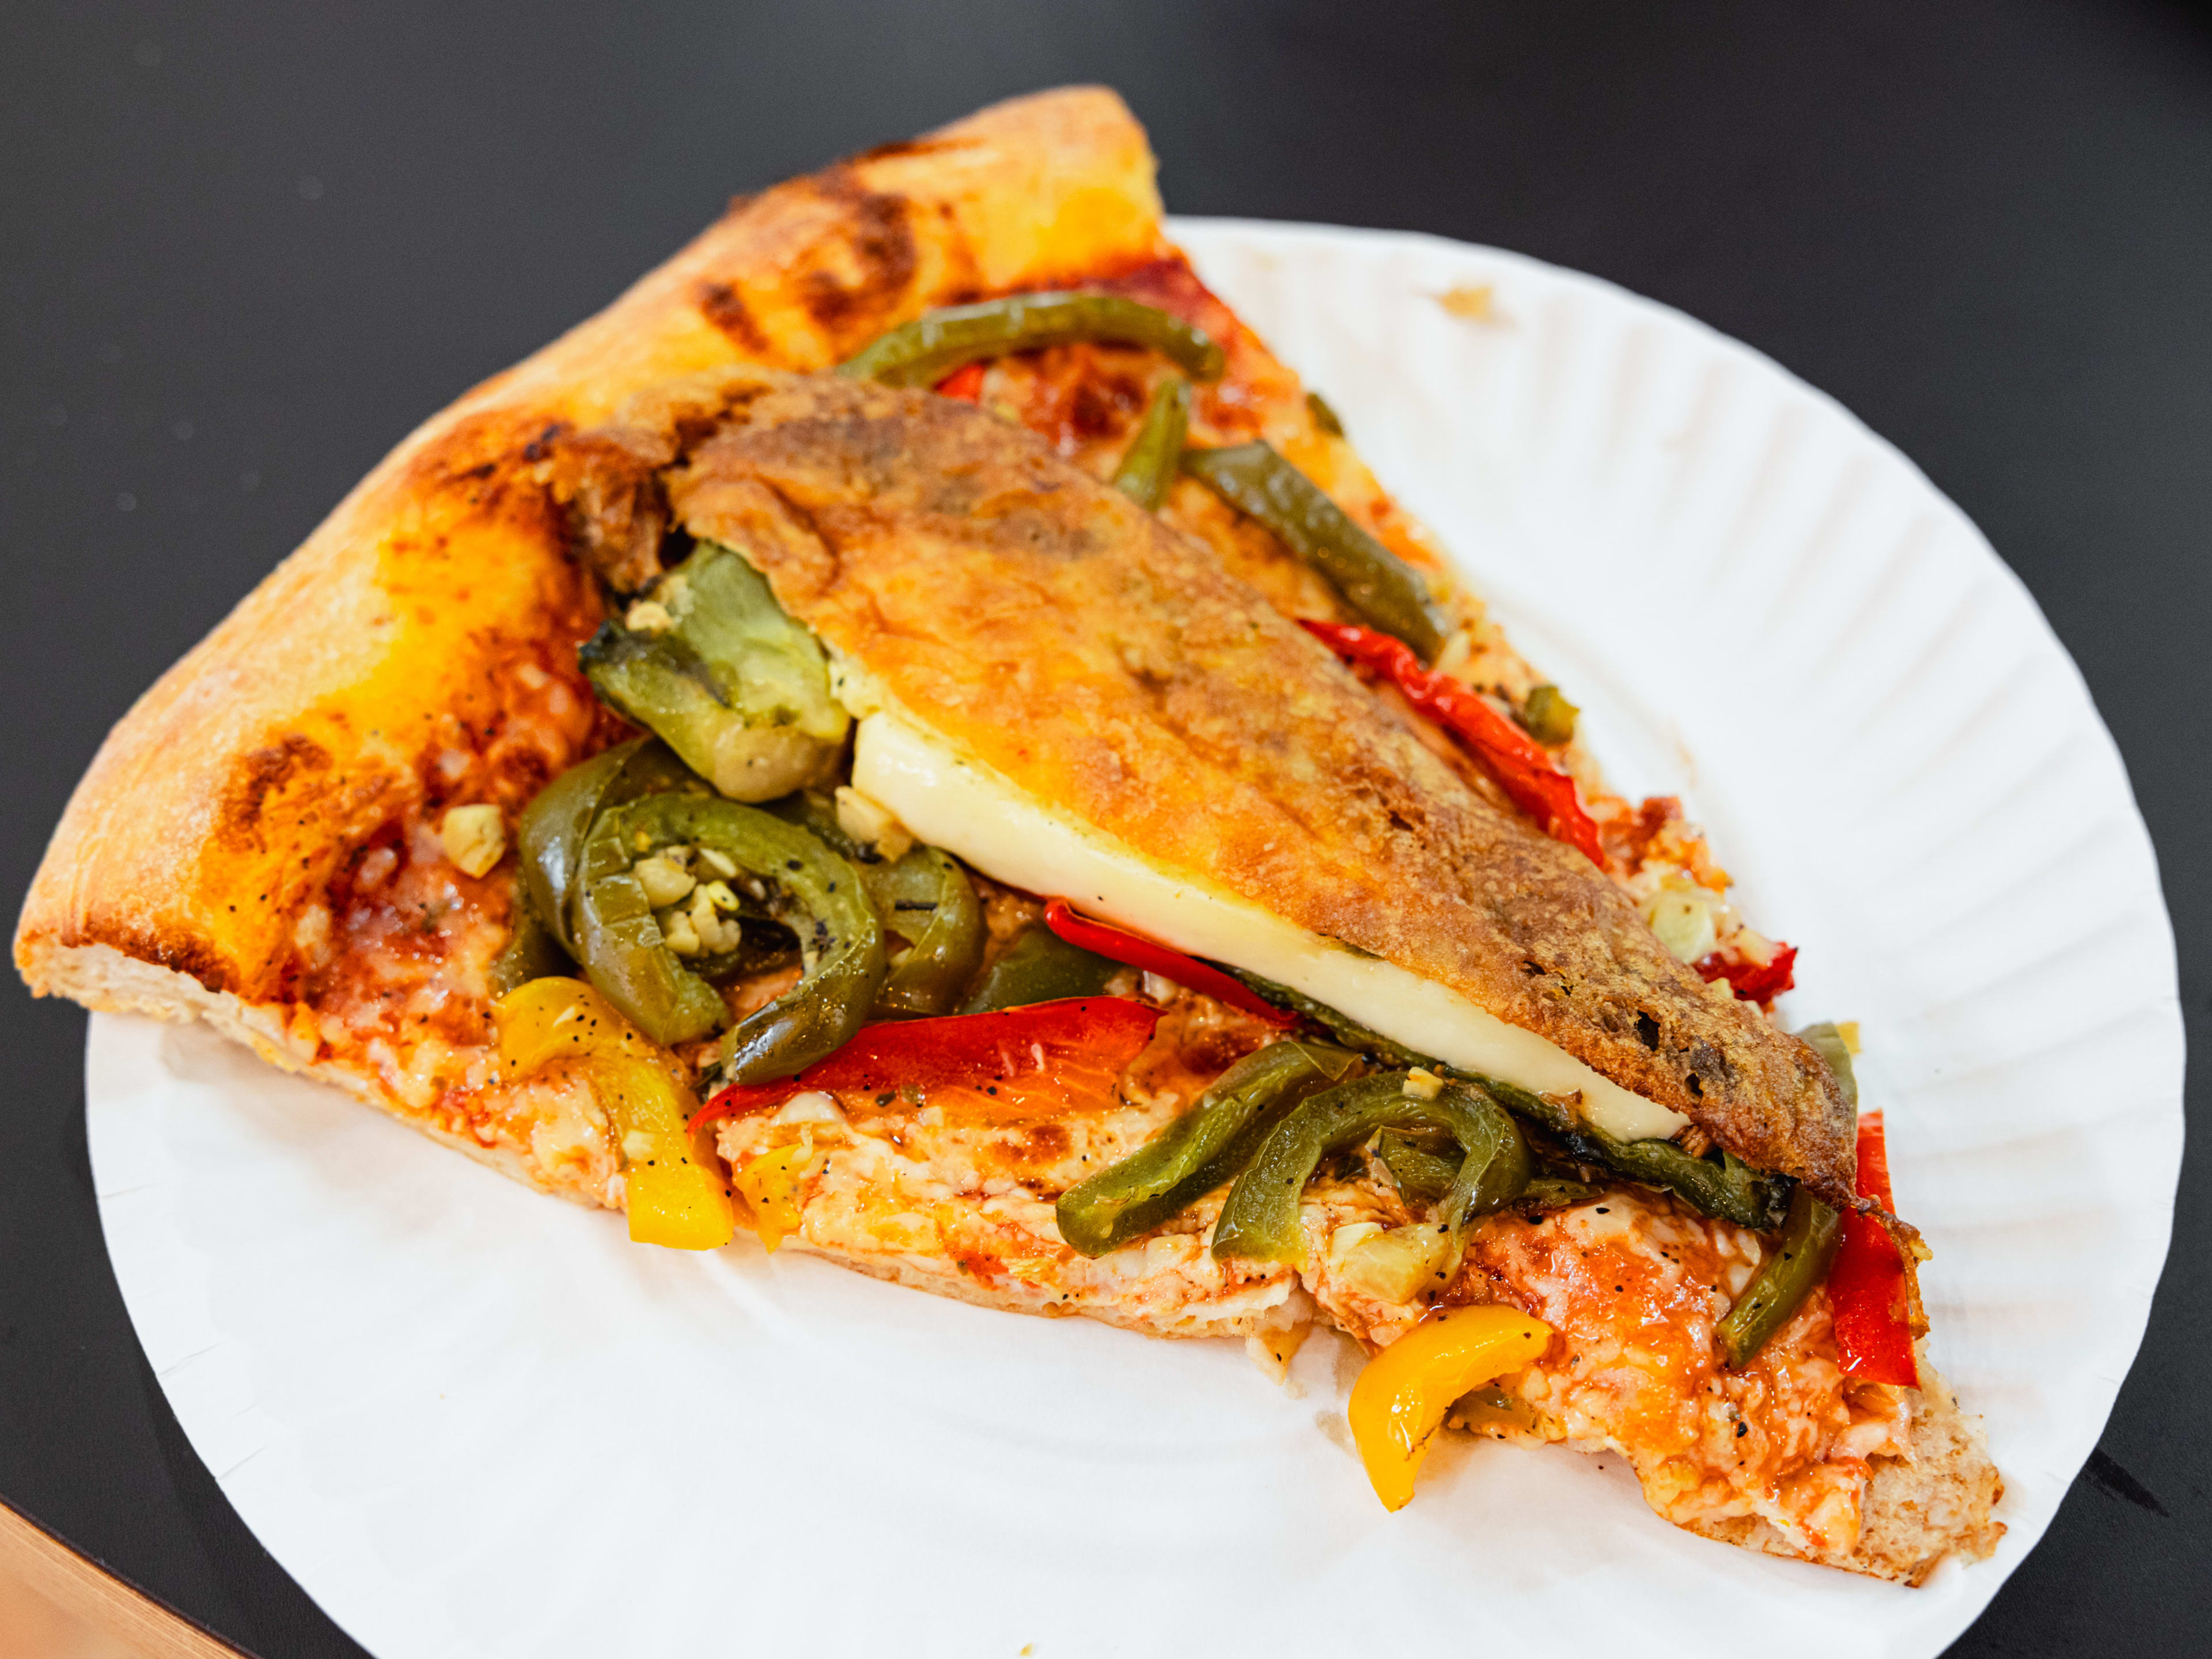 A slice of pizza with a chile relleno on top.